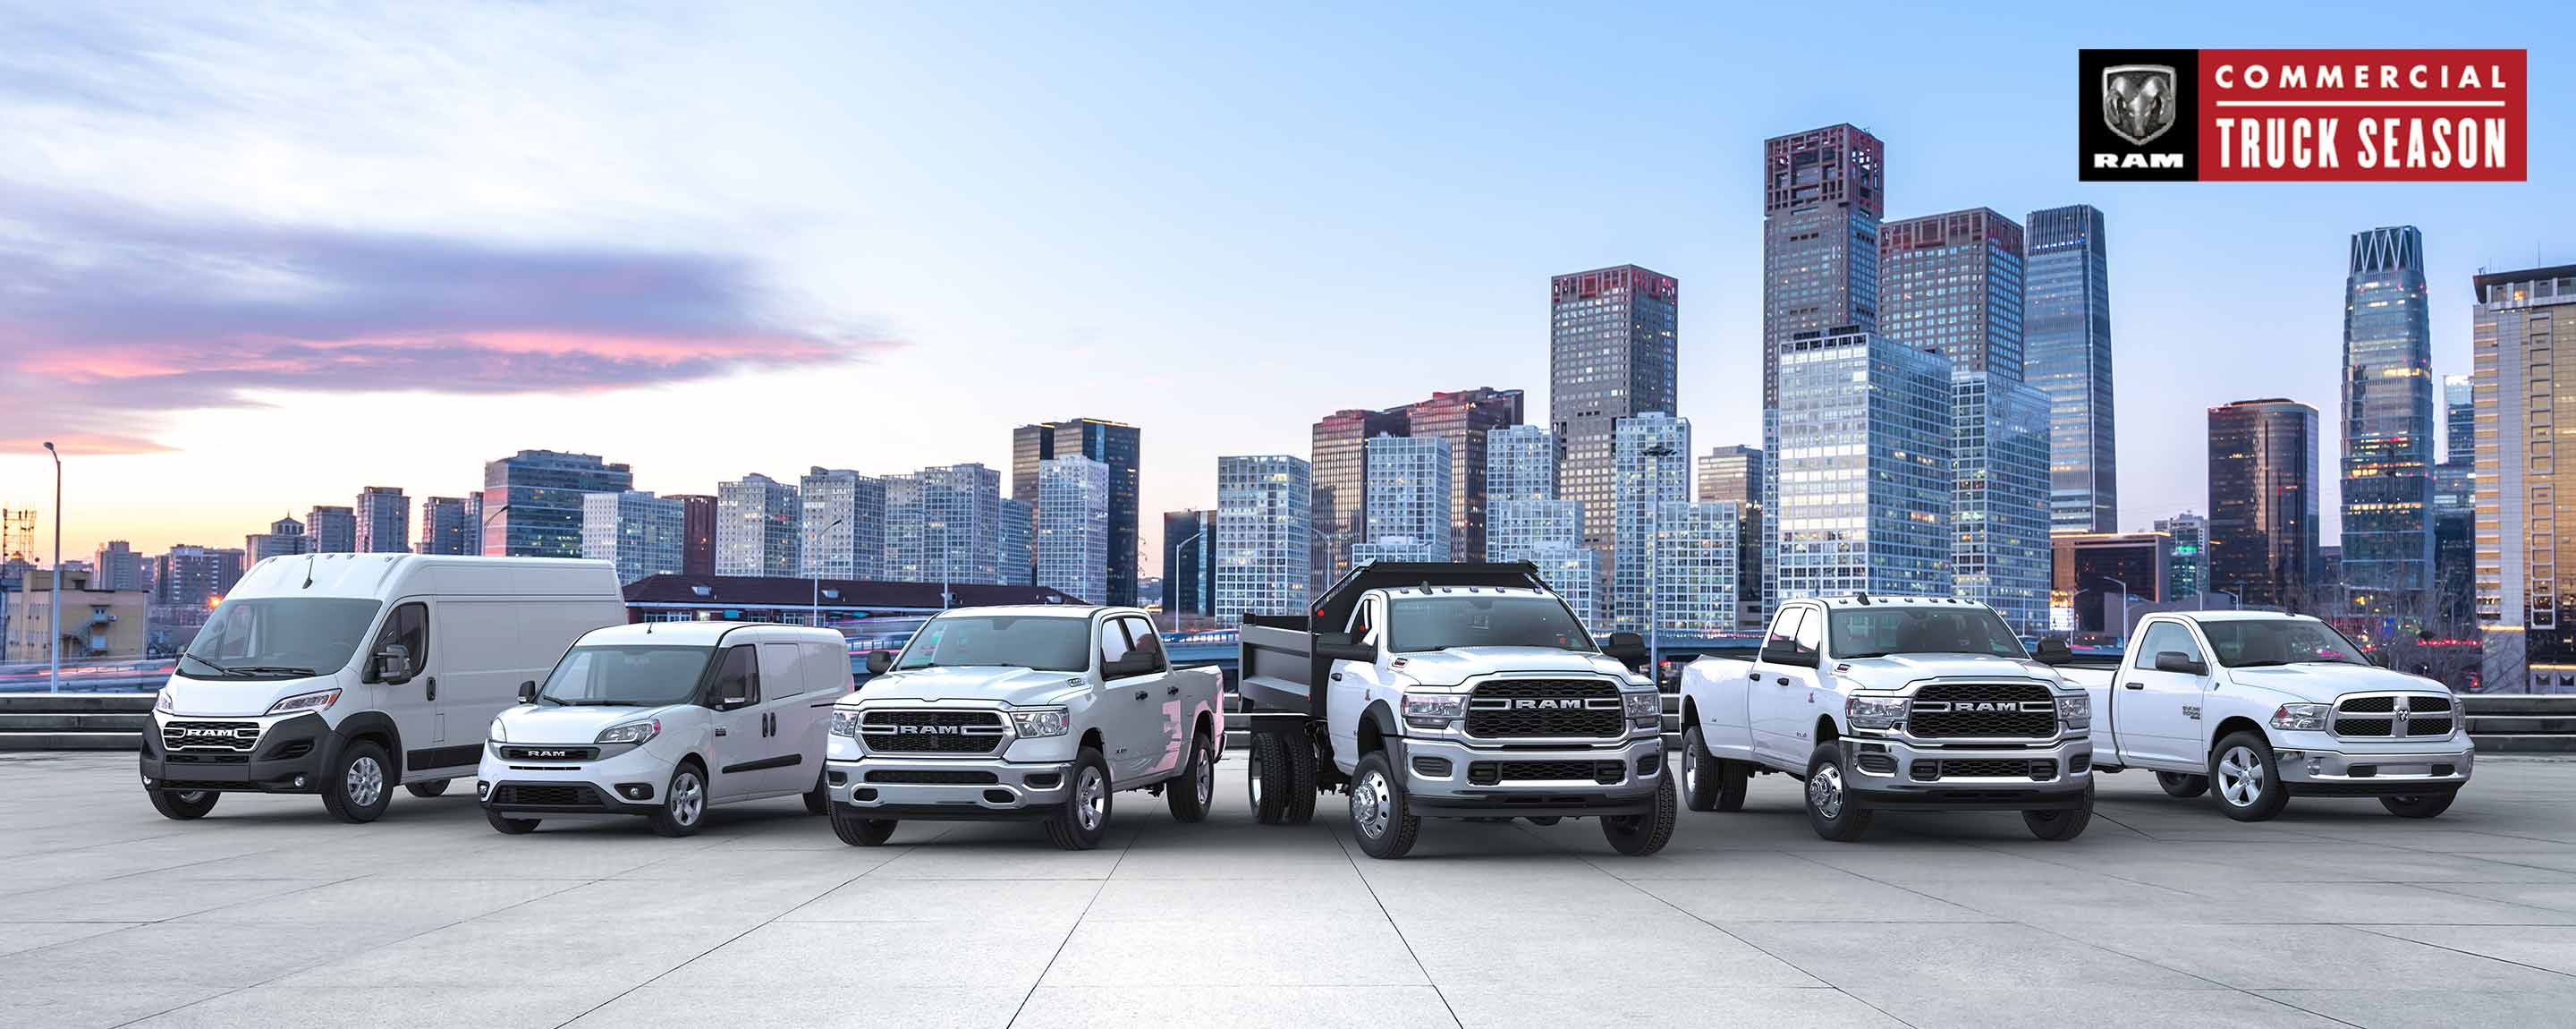 A lineup consisting of a 2023 Ram ProMaster Cargo Van, a 2022 Ram ProMaster City Passenger Van and four 2022 Ram trucks, all parked on a rooftop parking lot with a skyline of highrise buildings in the background.